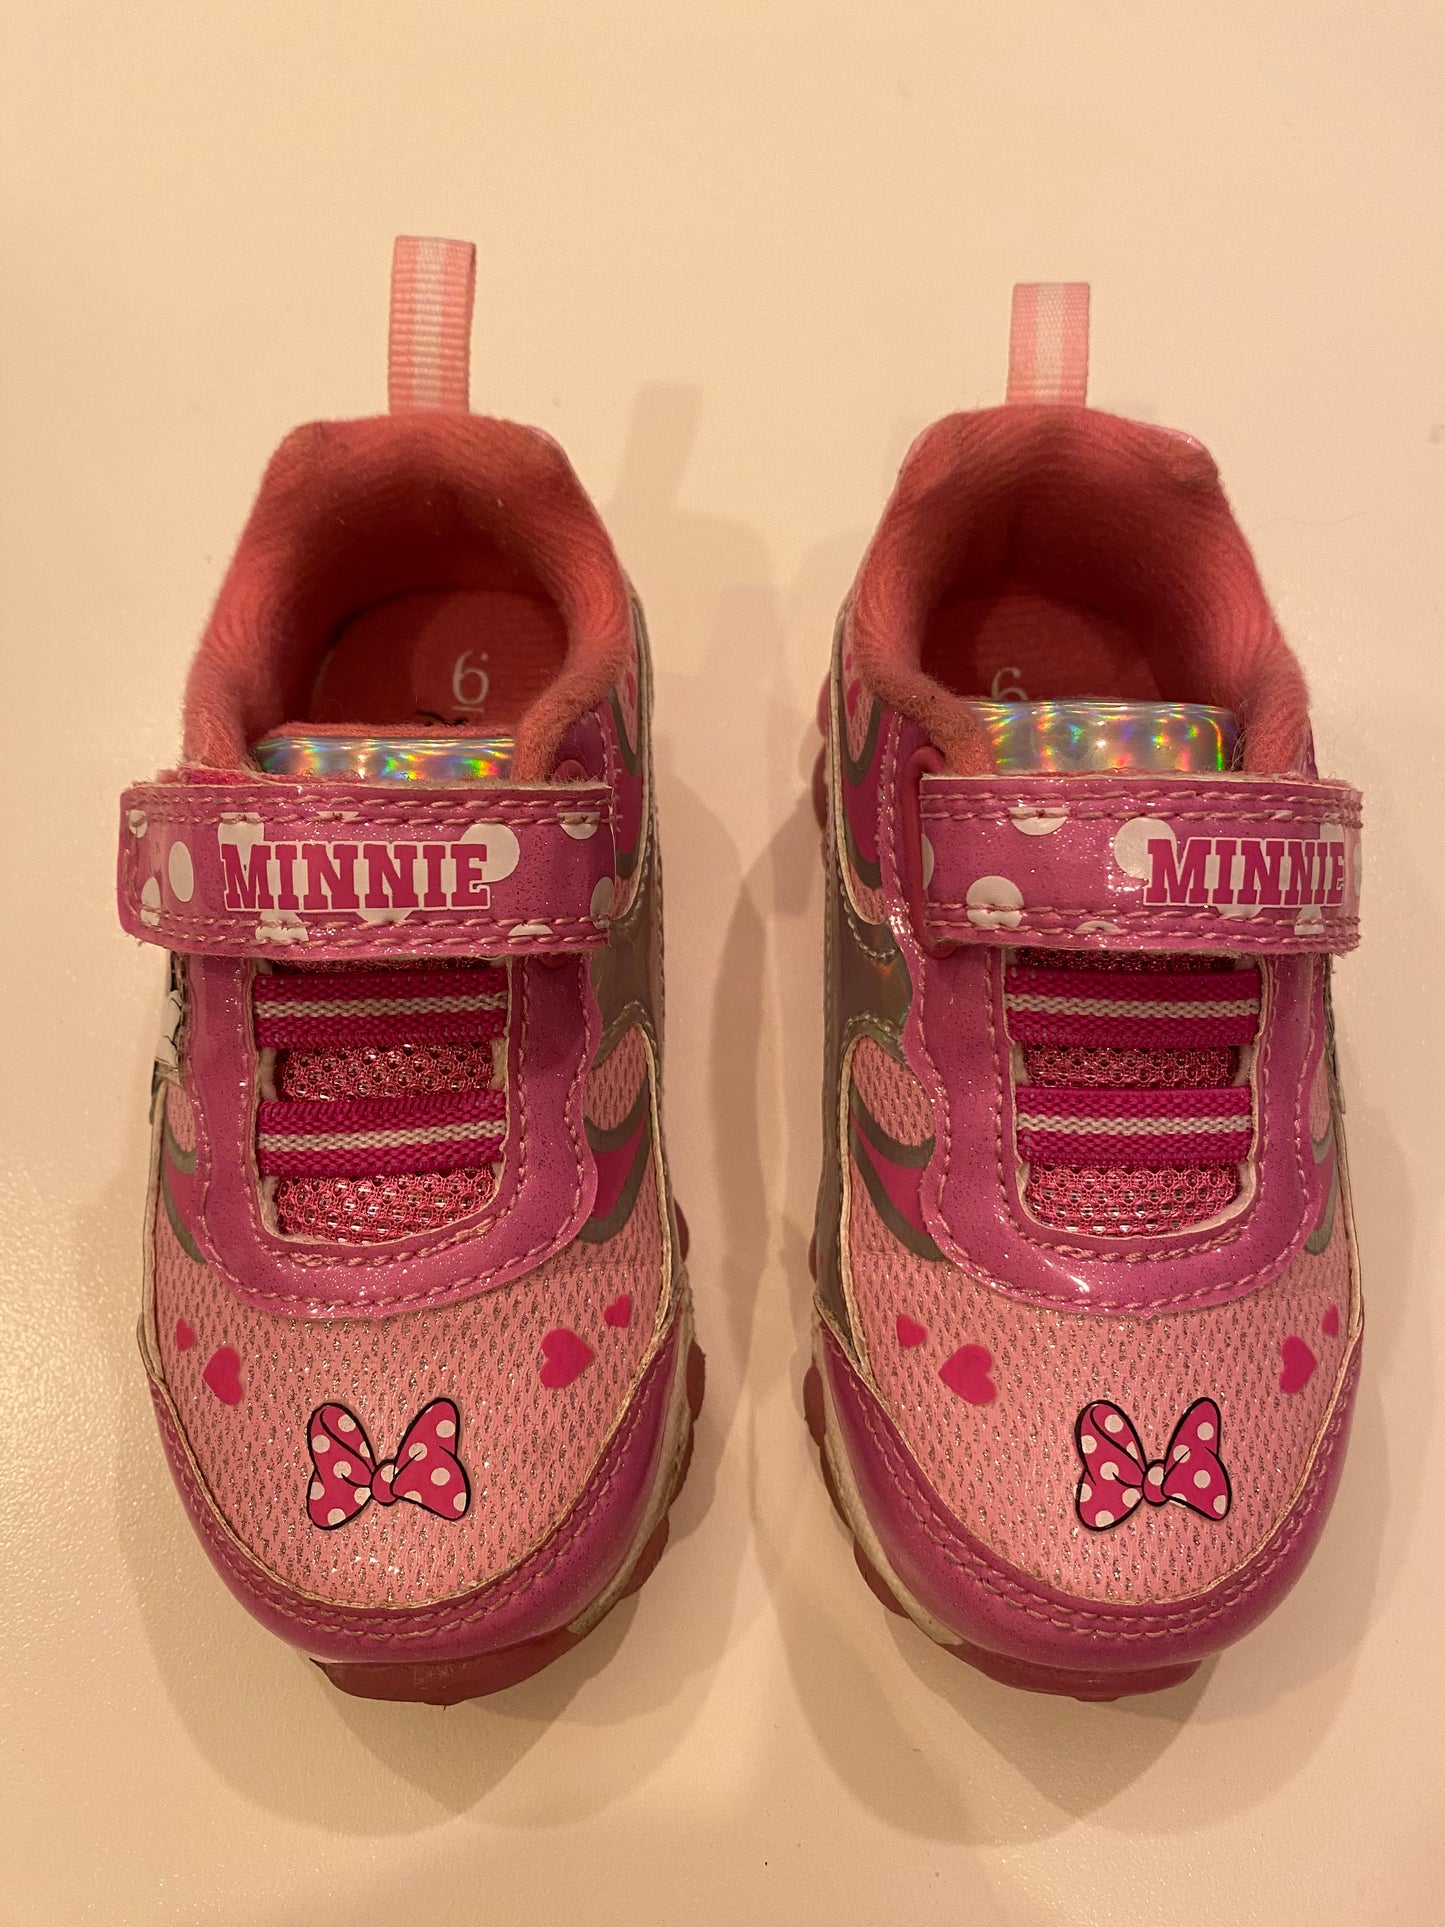 Disney Minnie Mouse Light Up Tennis Shoes Girls Size 6